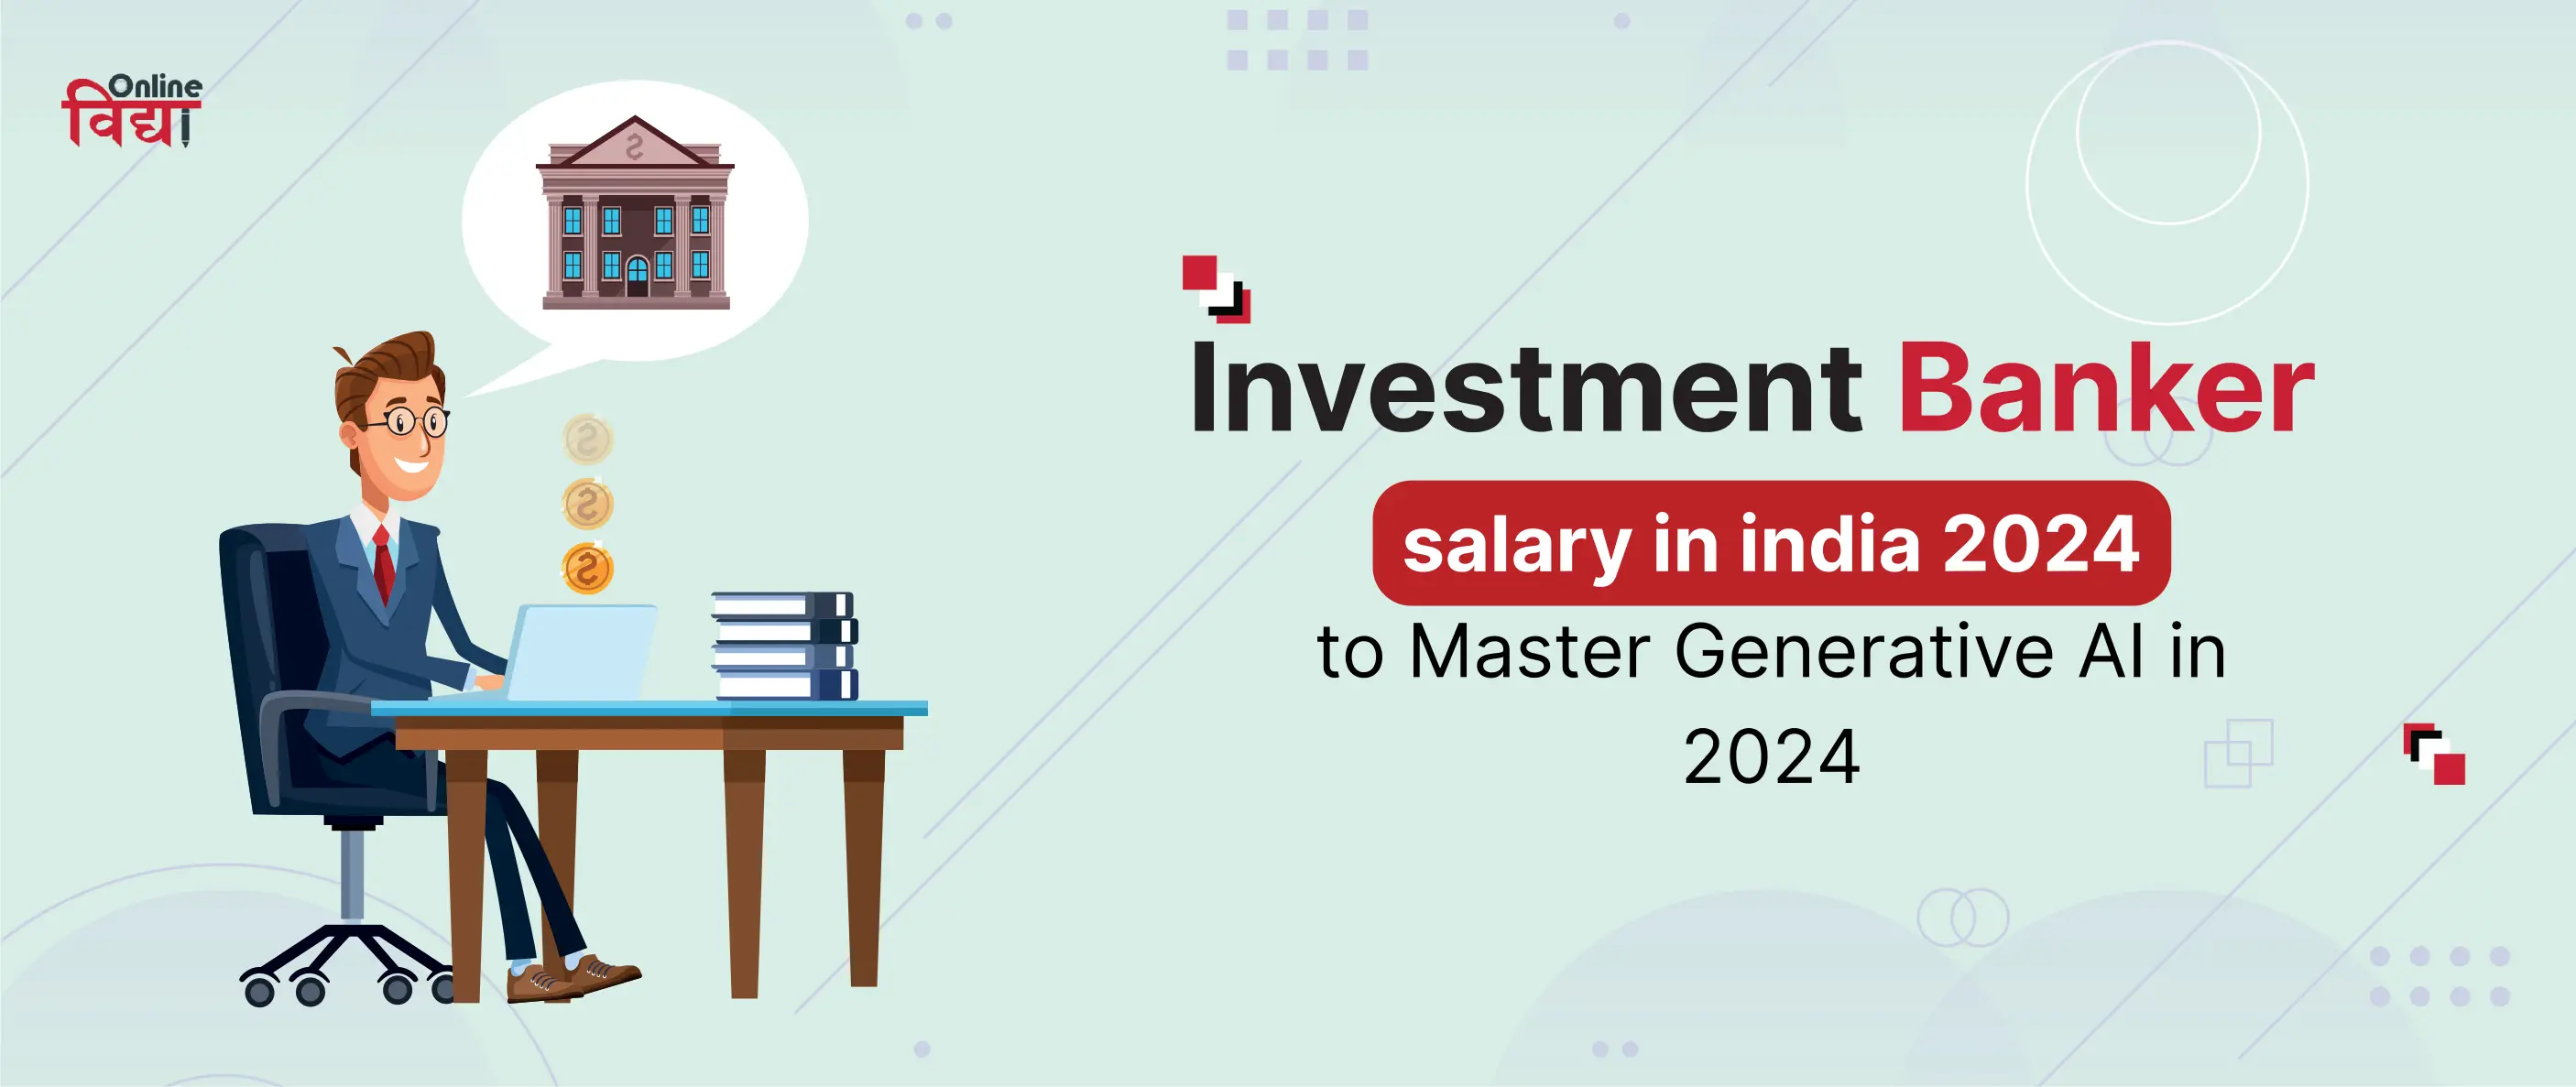 Investment Banker Salary in India 2024